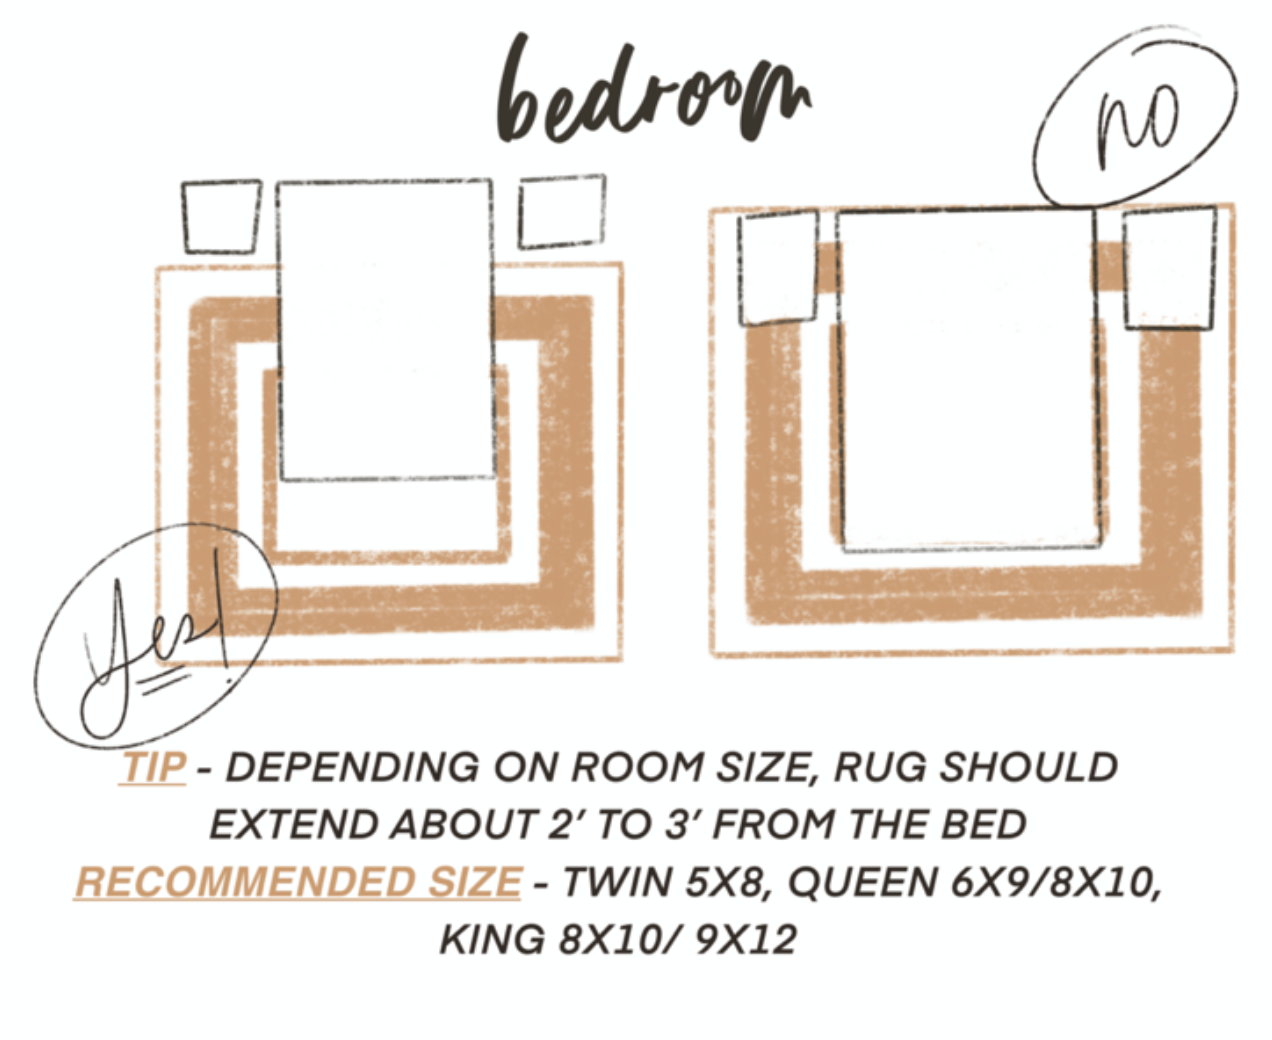 Size Rug With Guide Nesting Grace, How Big Should A Rug Under Queen Bed Be